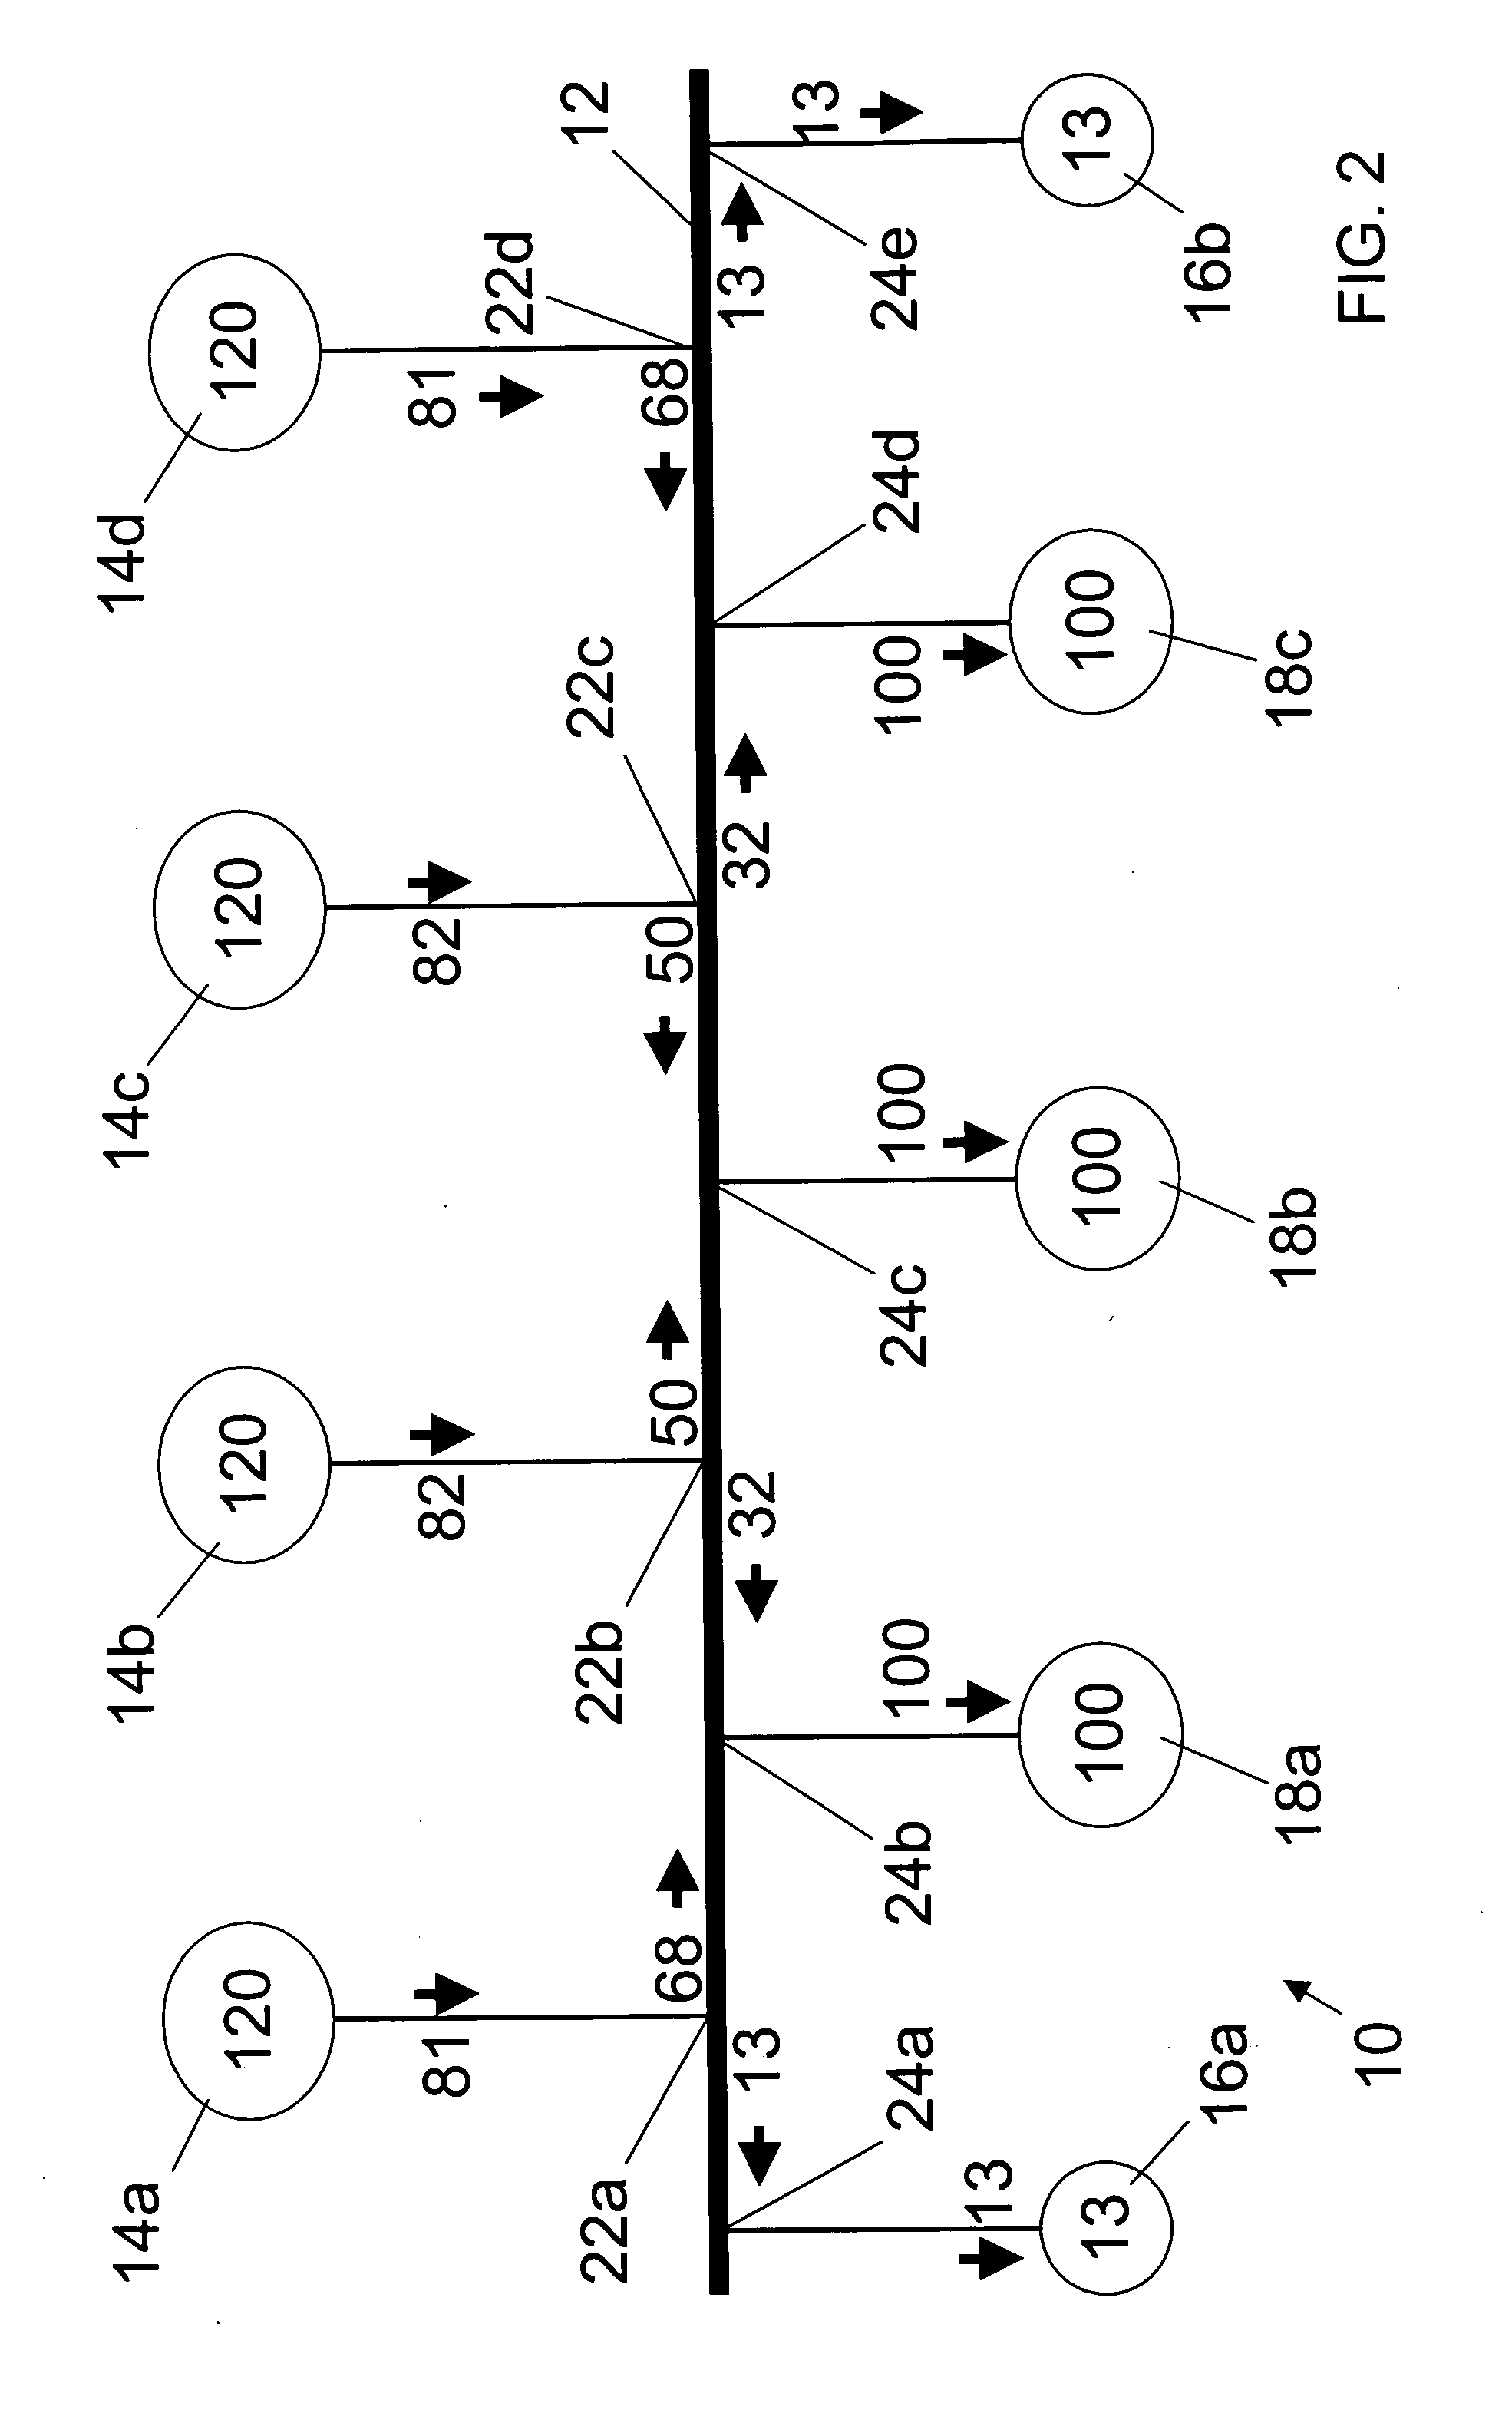 Stand-alone electrical system for large motor loads